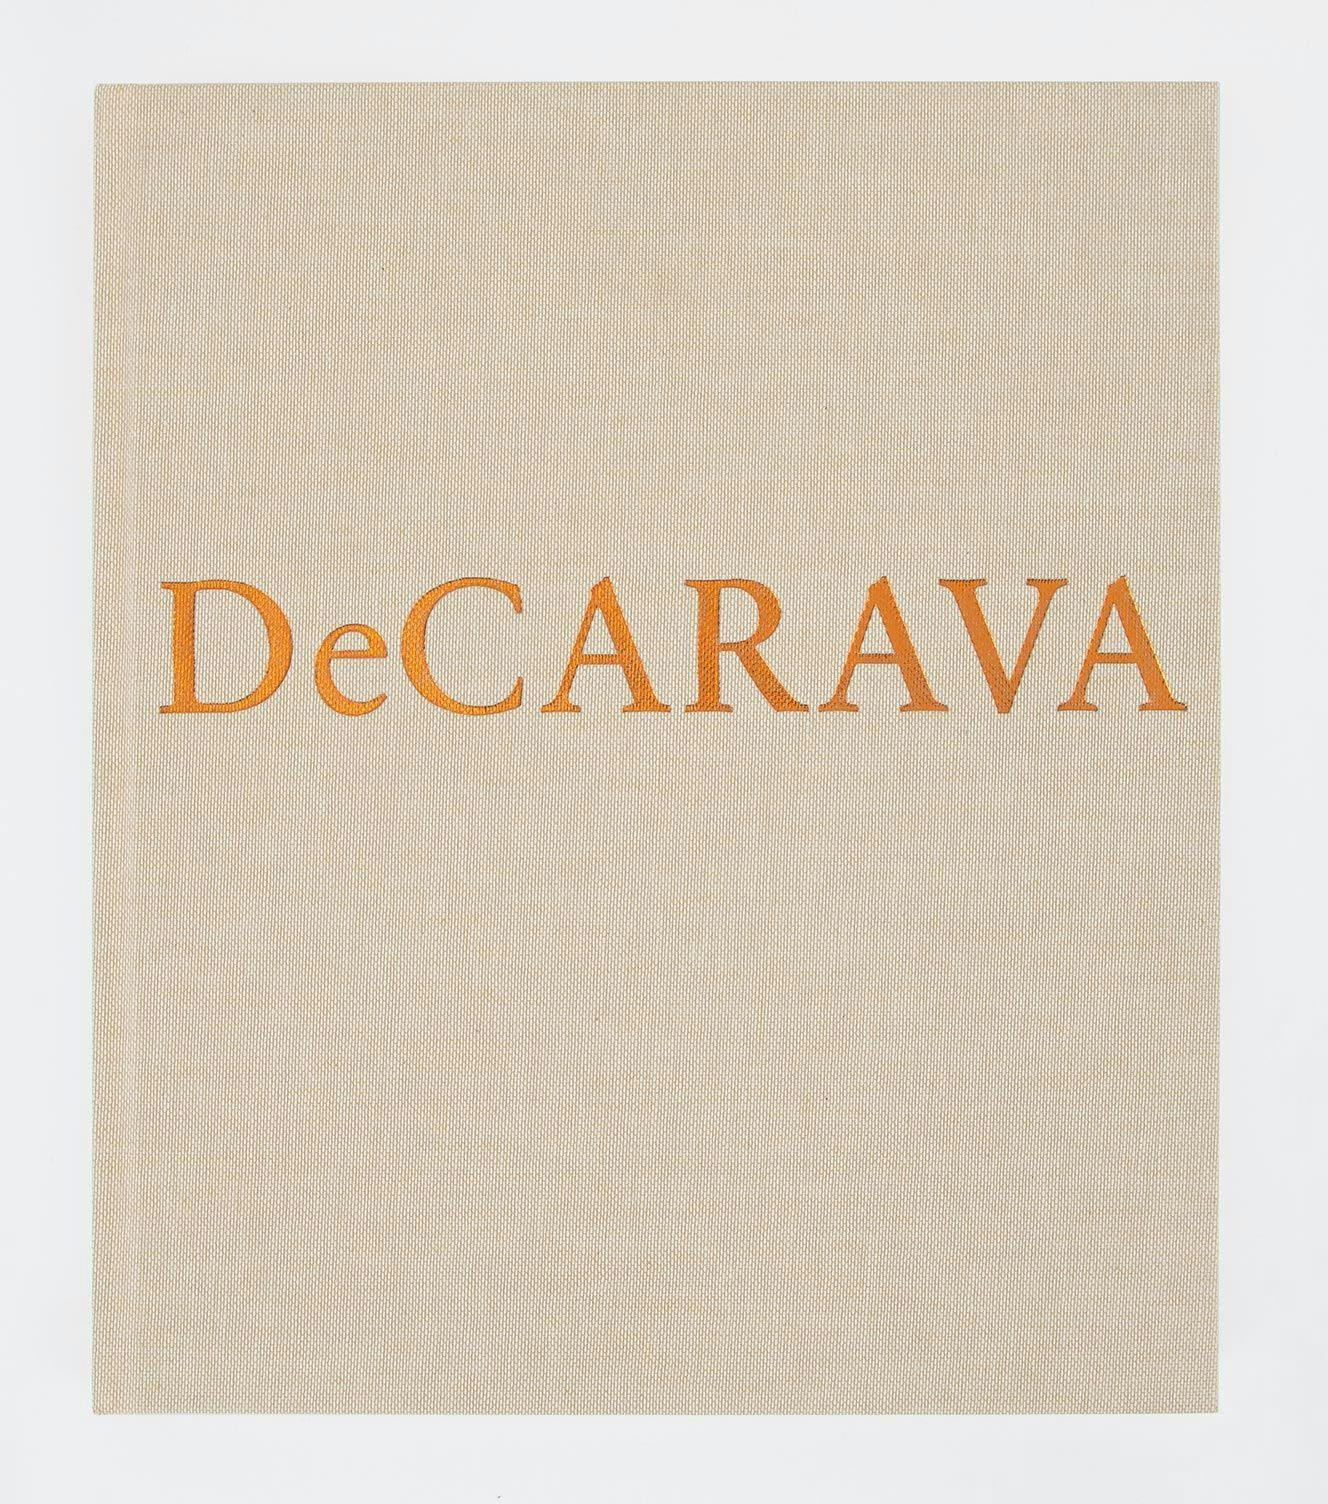 The cover of a book, titled Roy DeCarava: Light Break.